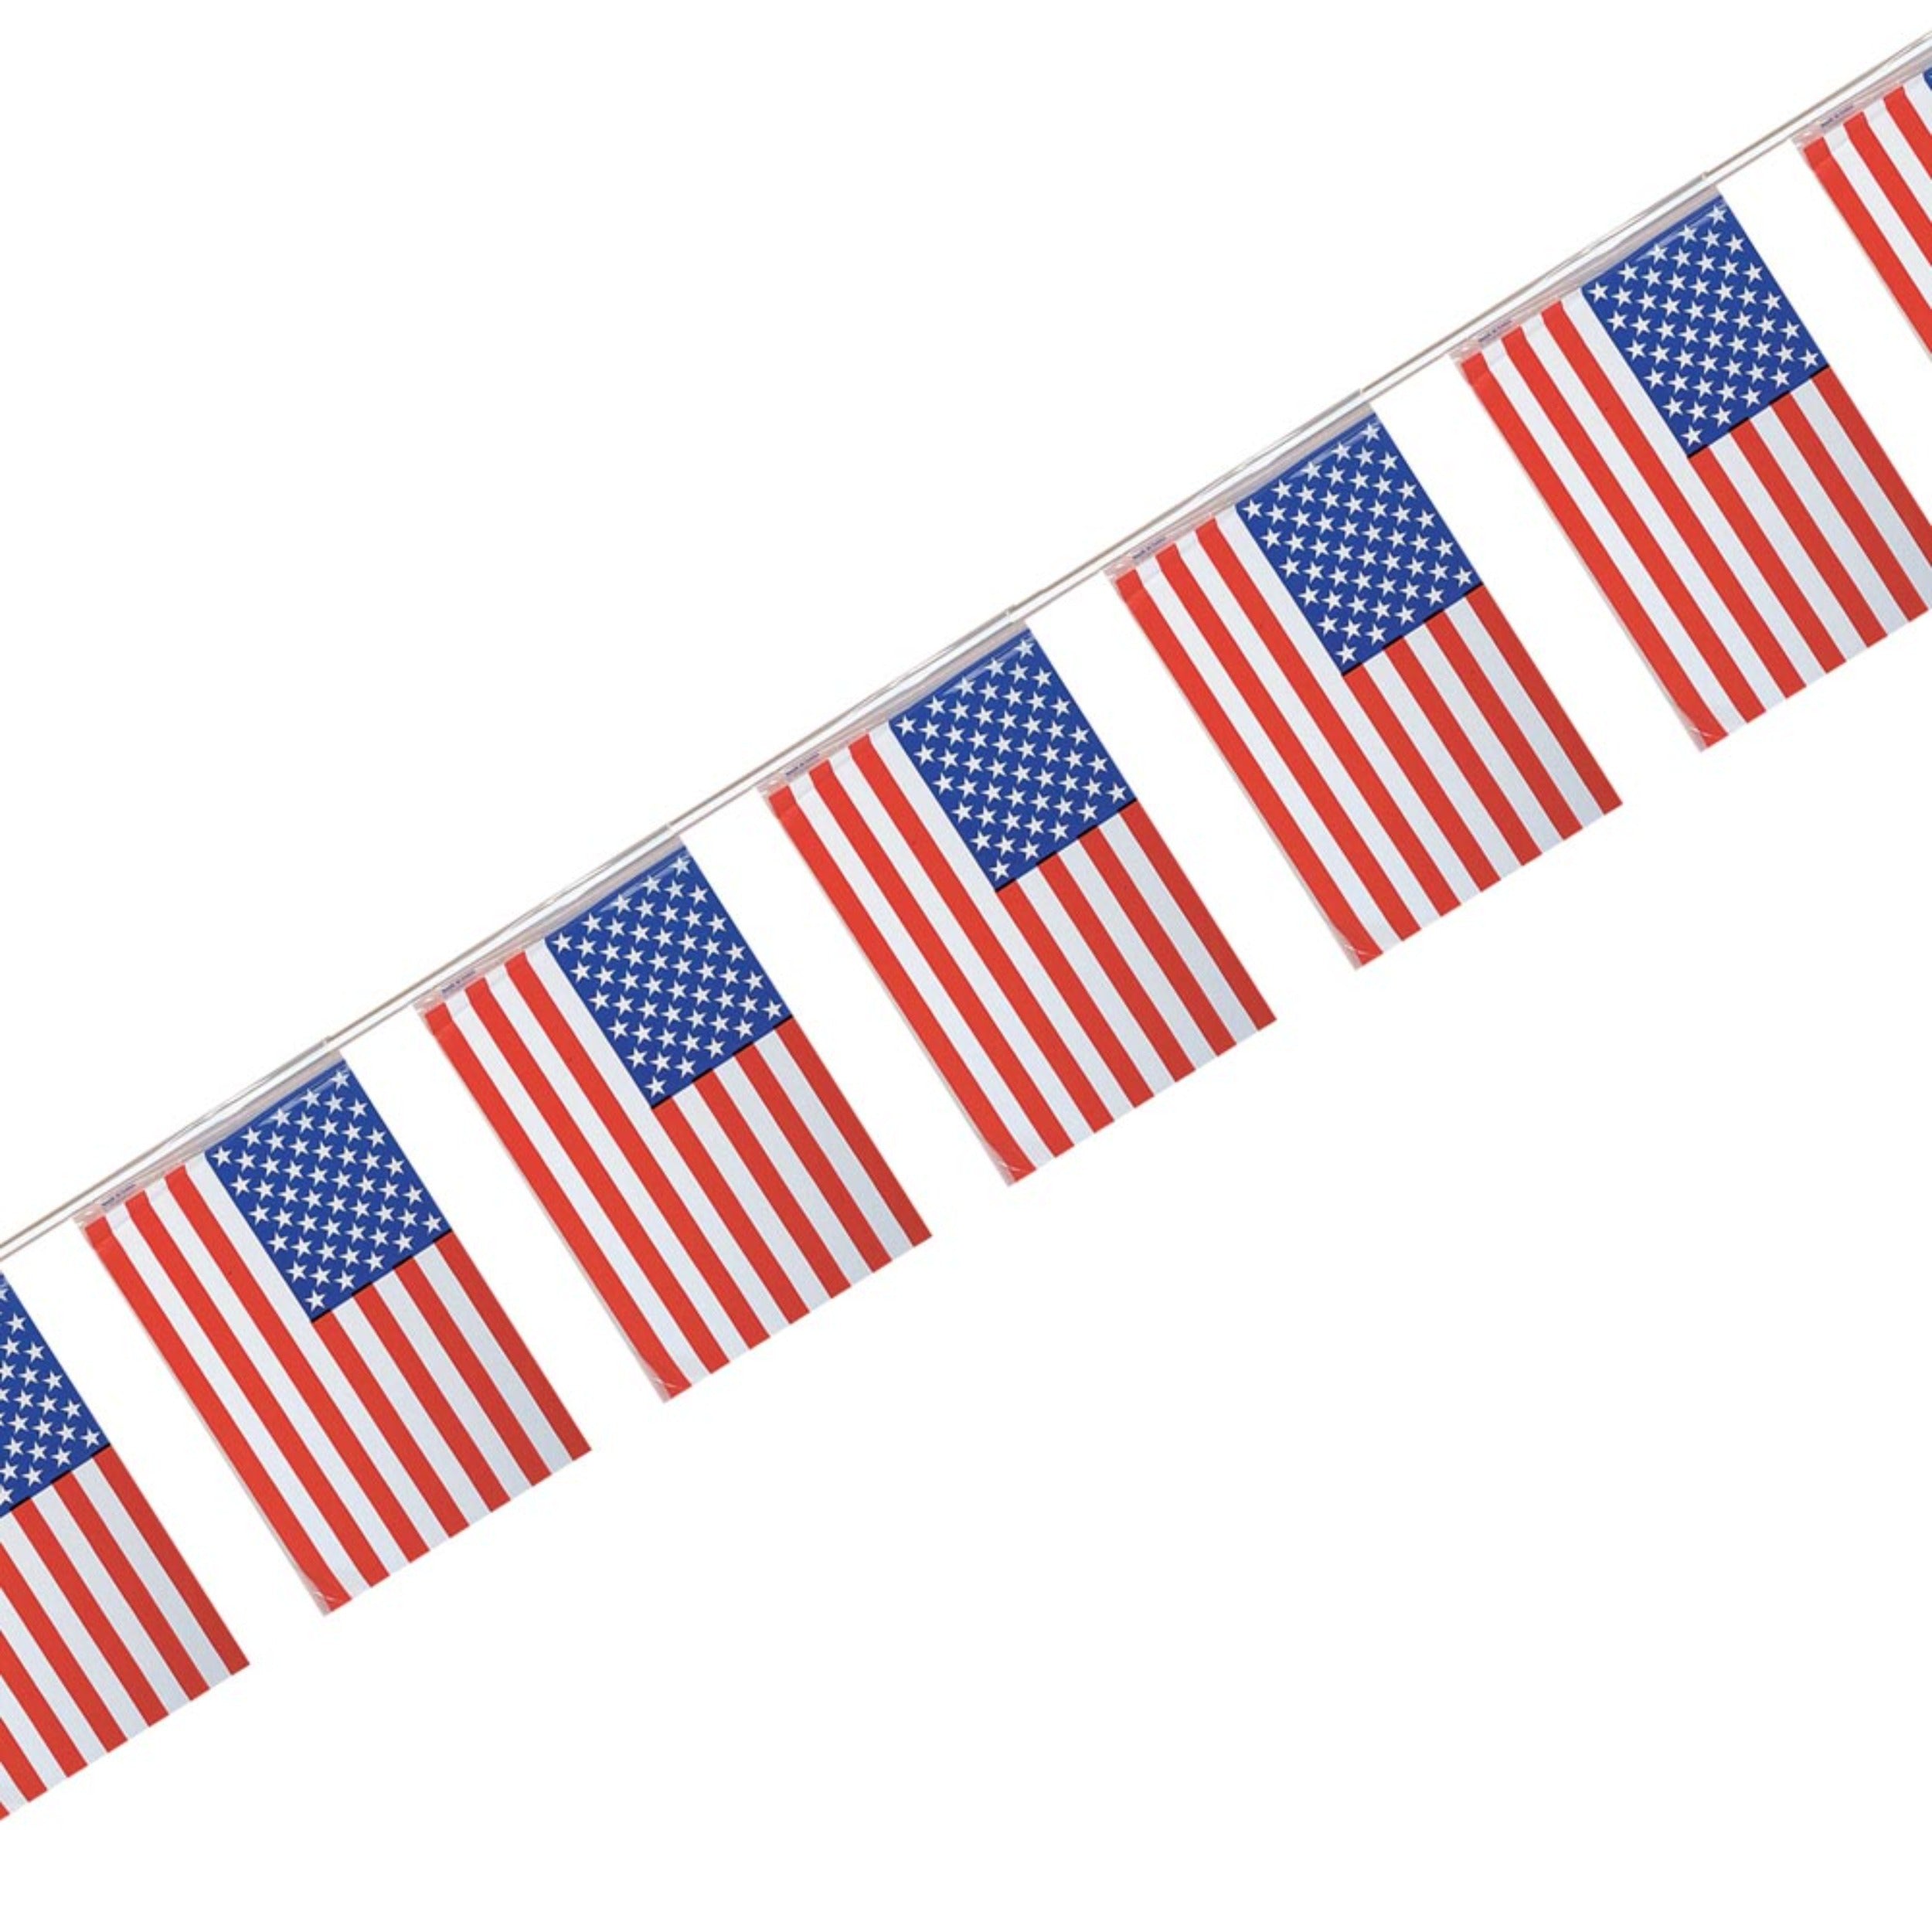 Show Your Patriotism with Our American Flag Pennant String Banner